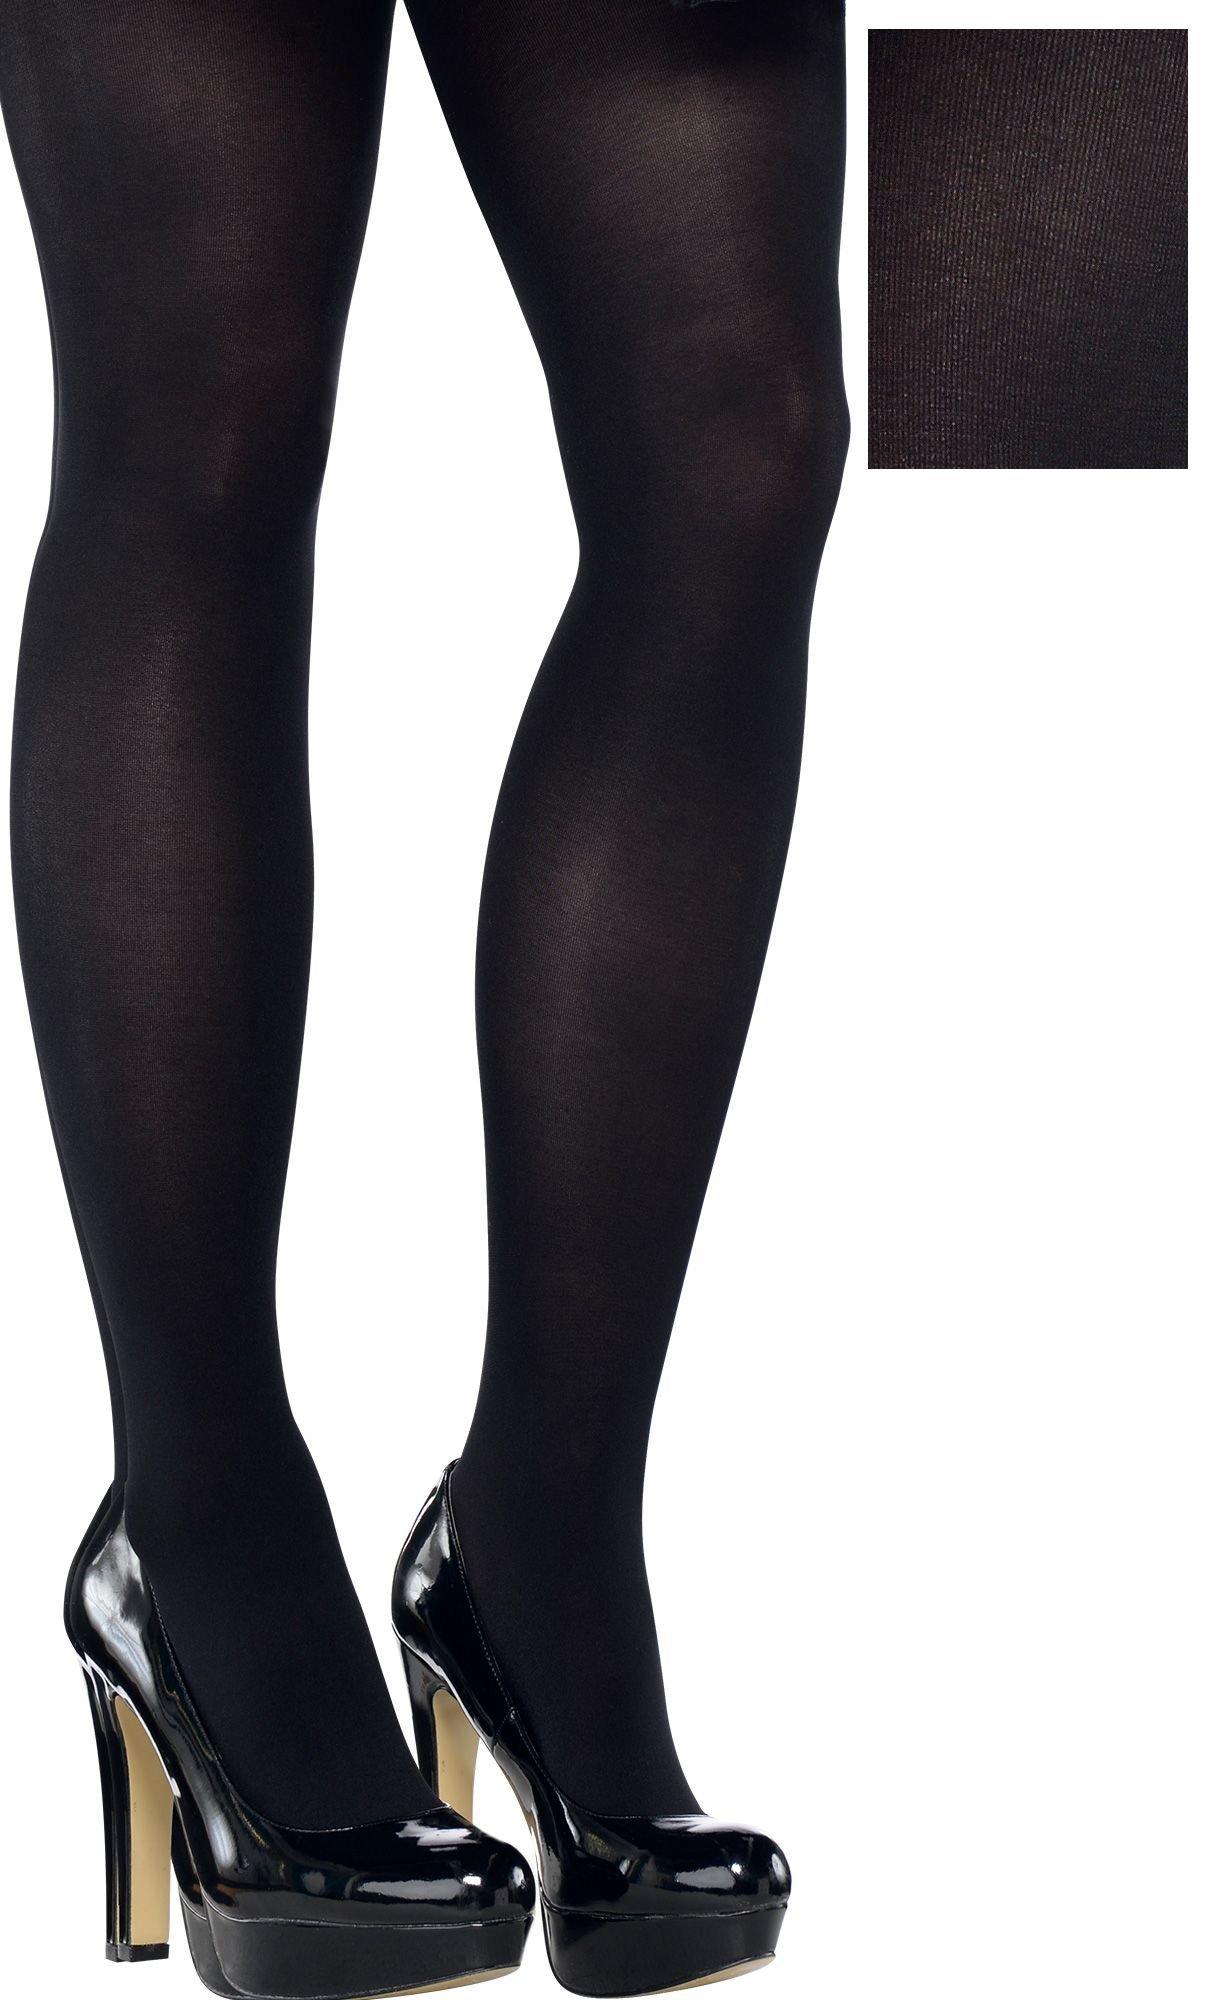 Black Tights for Plus Size Women